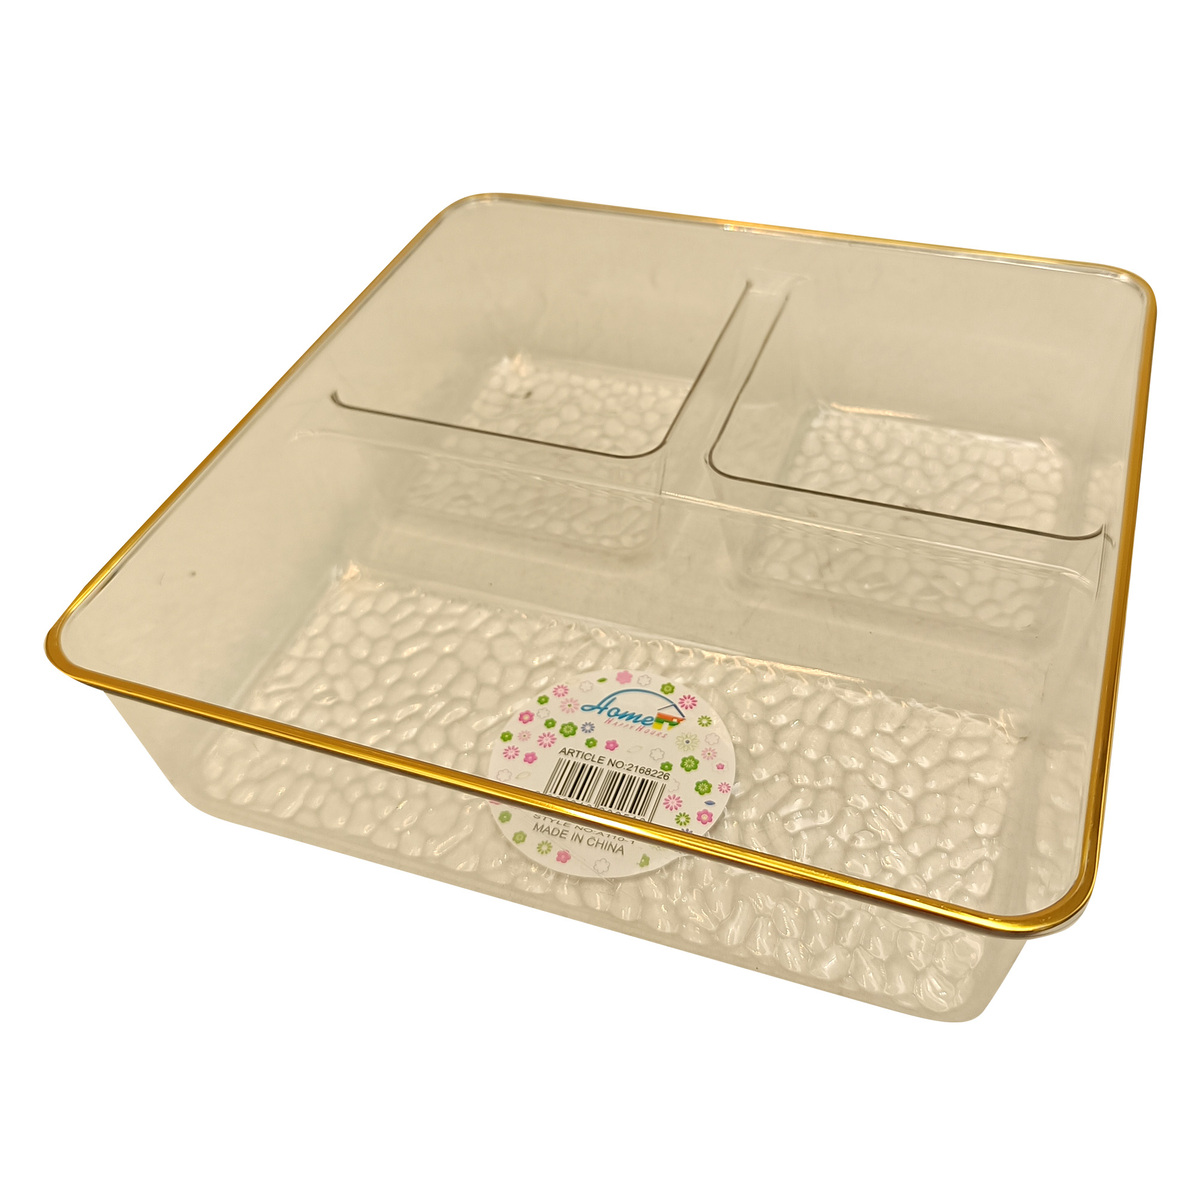 Home Plastic Serving Tray, 20 x 20 cm, MKT23/47